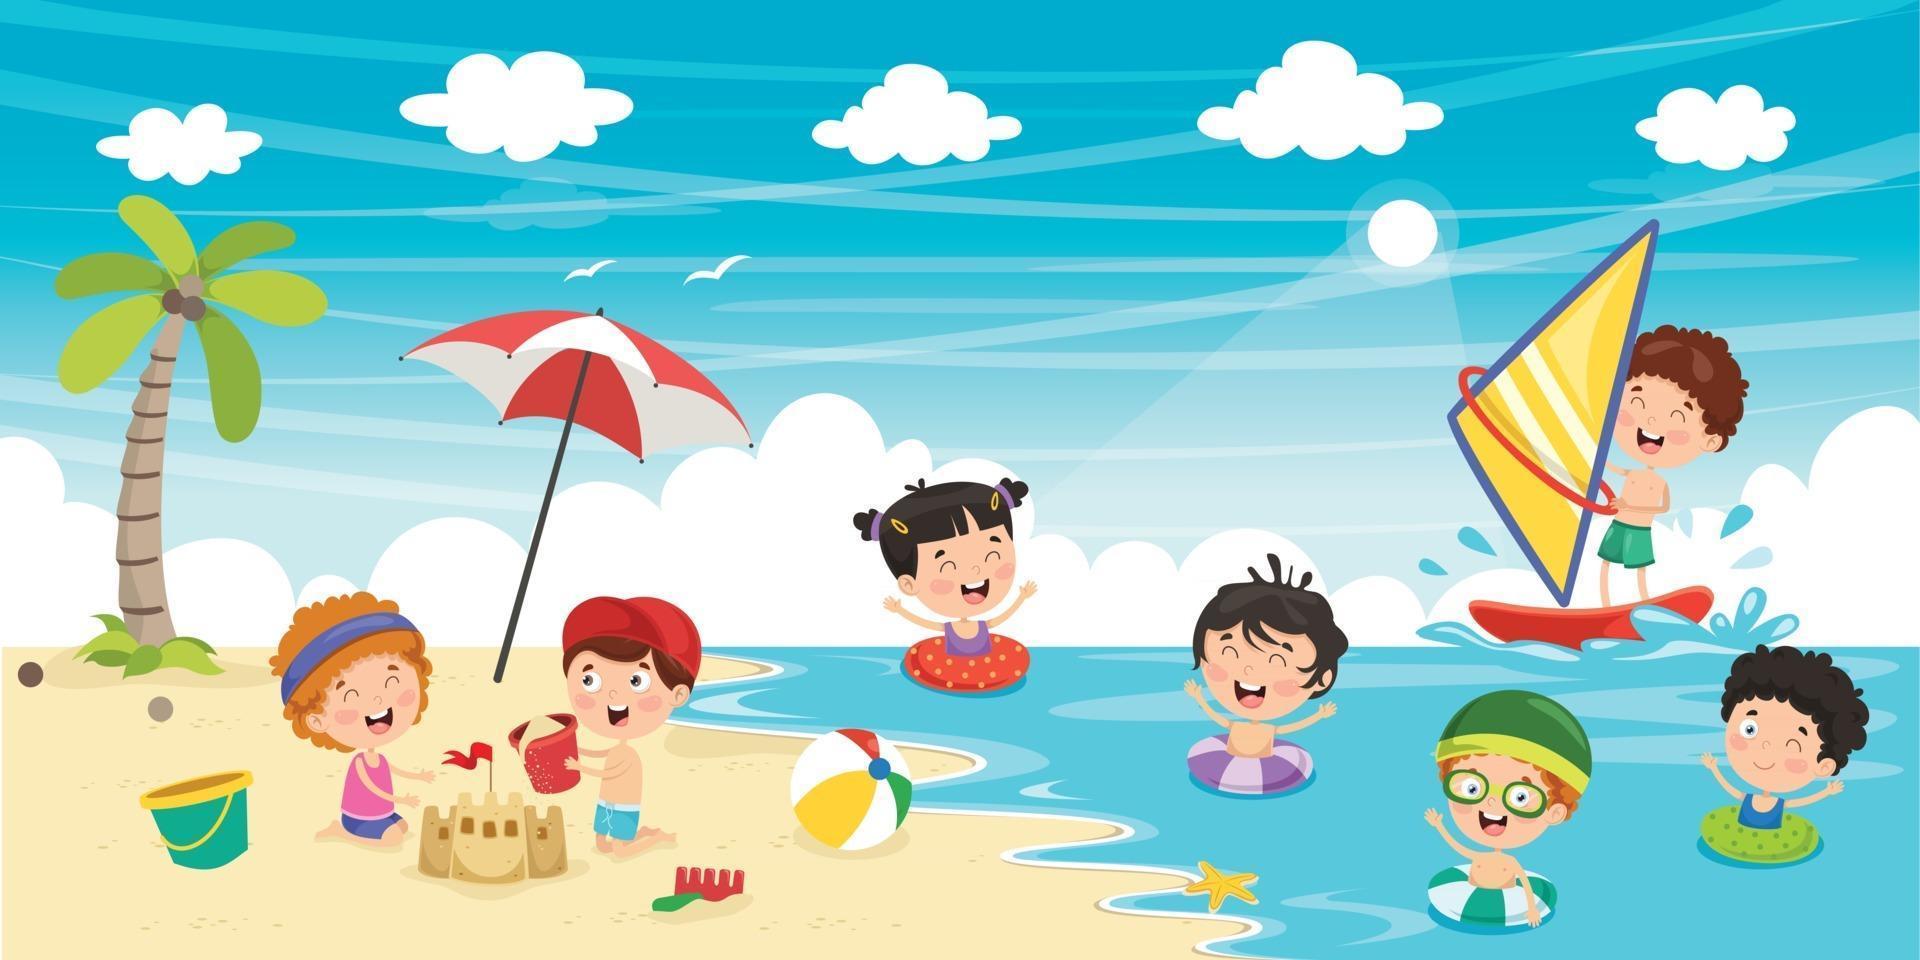 summer season drawing : Easy tips to protect your eyes - Health Vision-saigonsouth.com.vn